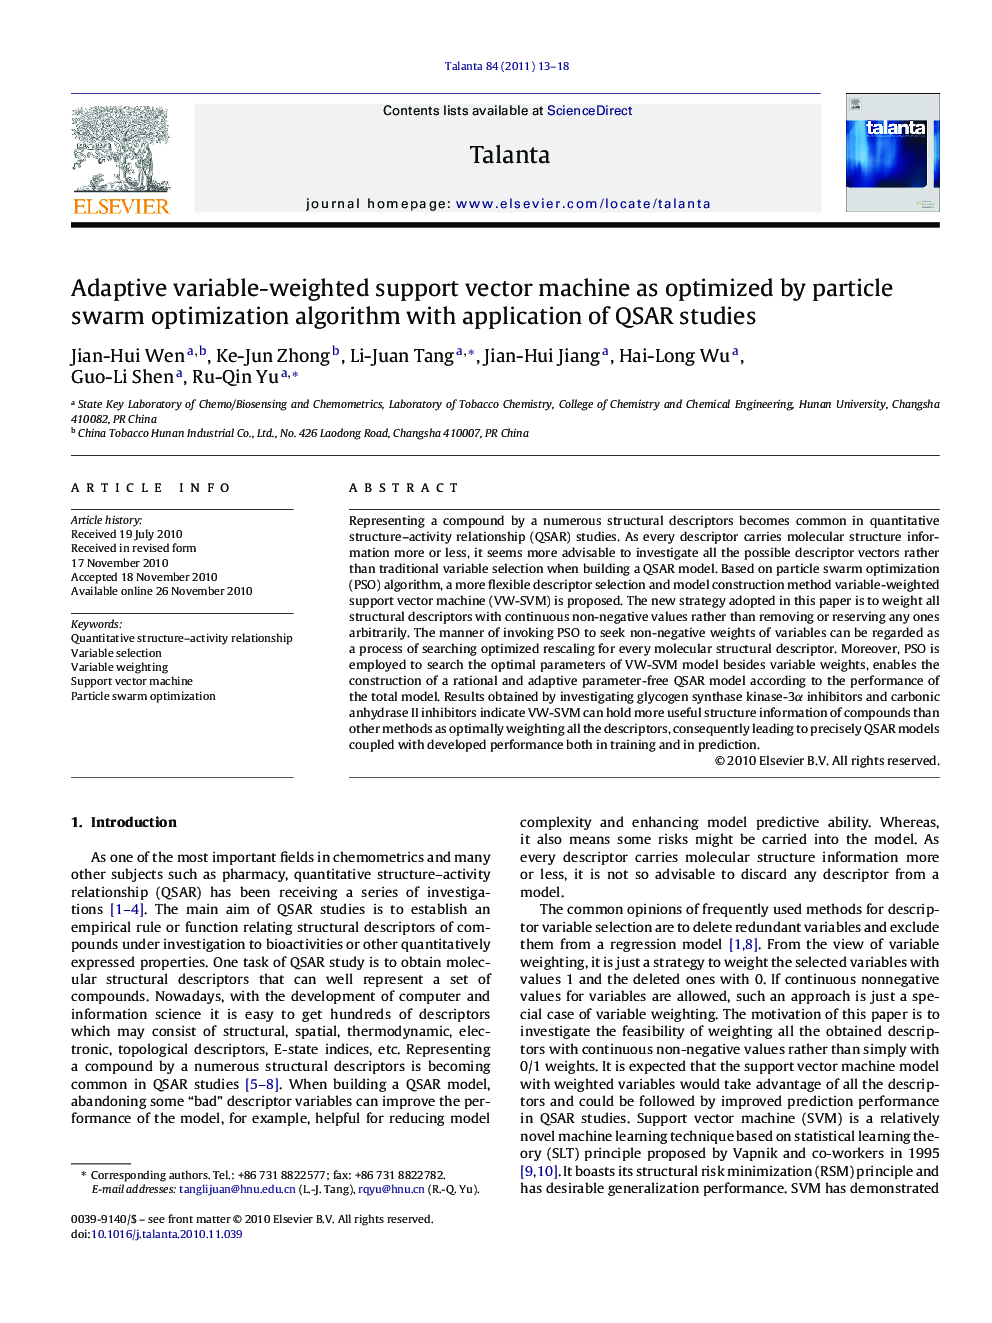 Adaptive variable-weighted support vector machine as optimized by particle swarm optimization algorithm with application of QSAR studies